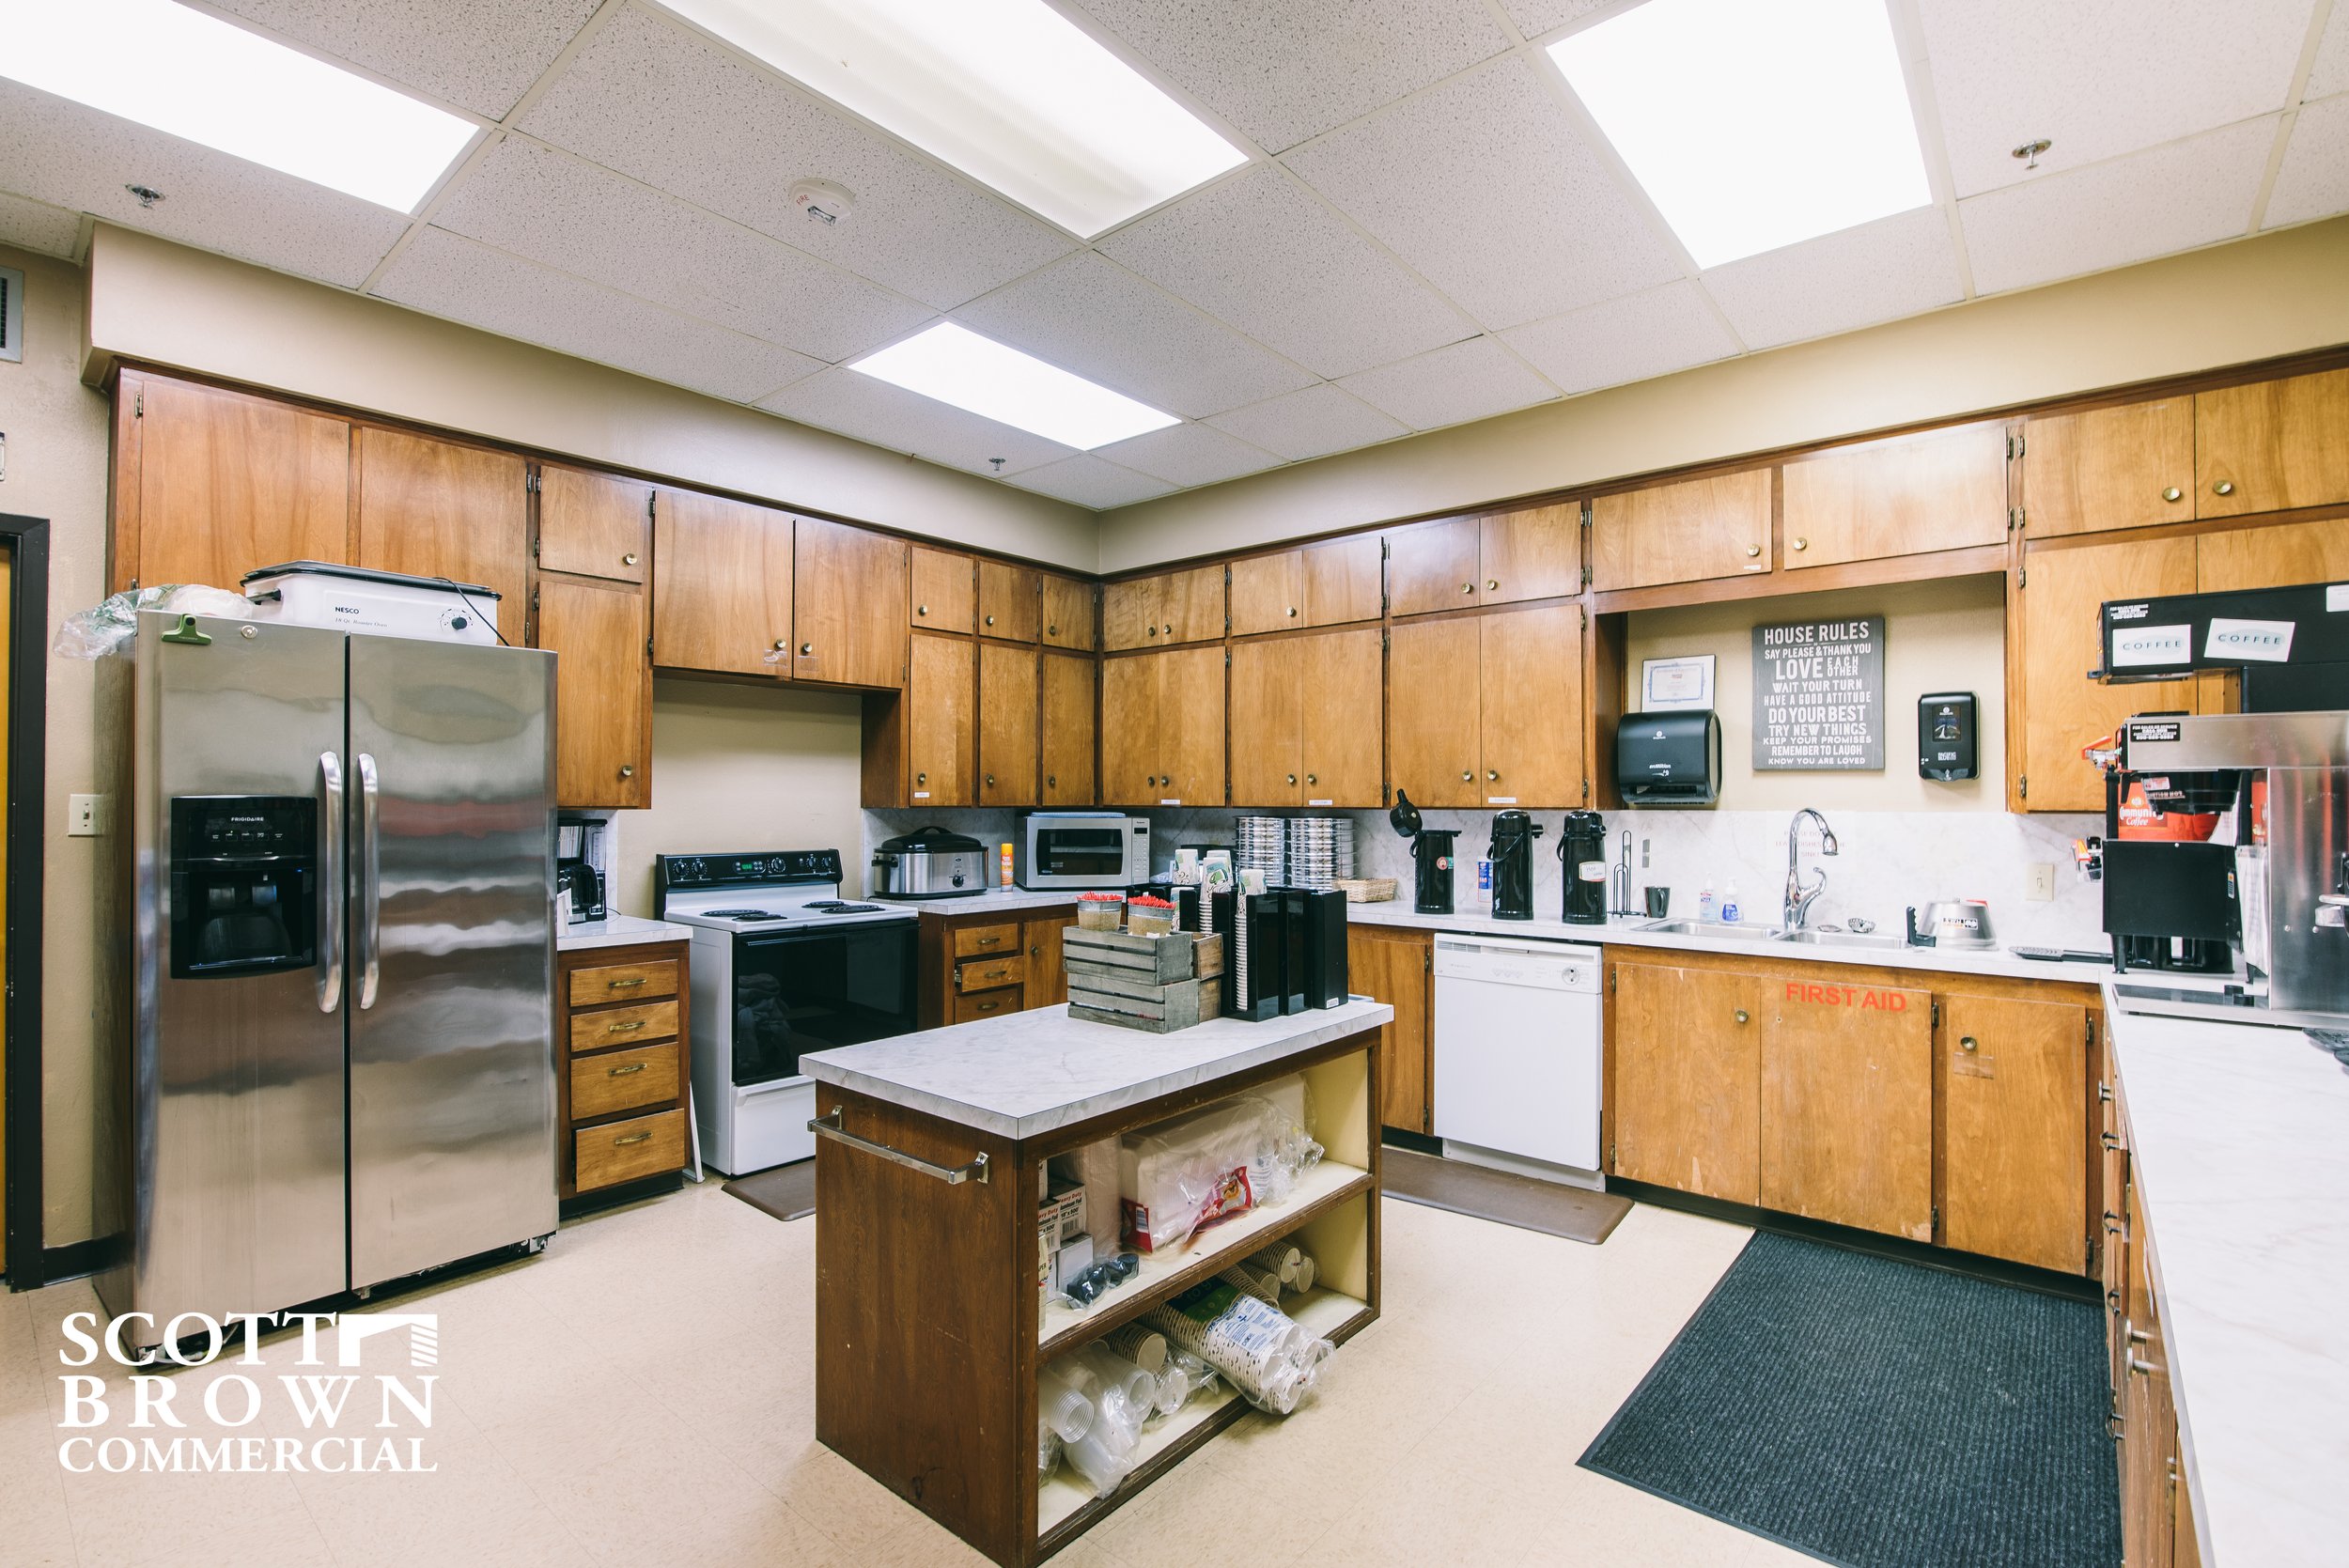  a fully loaded and functional kitchen with fridge, stove, sink, and other appliances with cabinets wrapping all the way around the U shaped room 